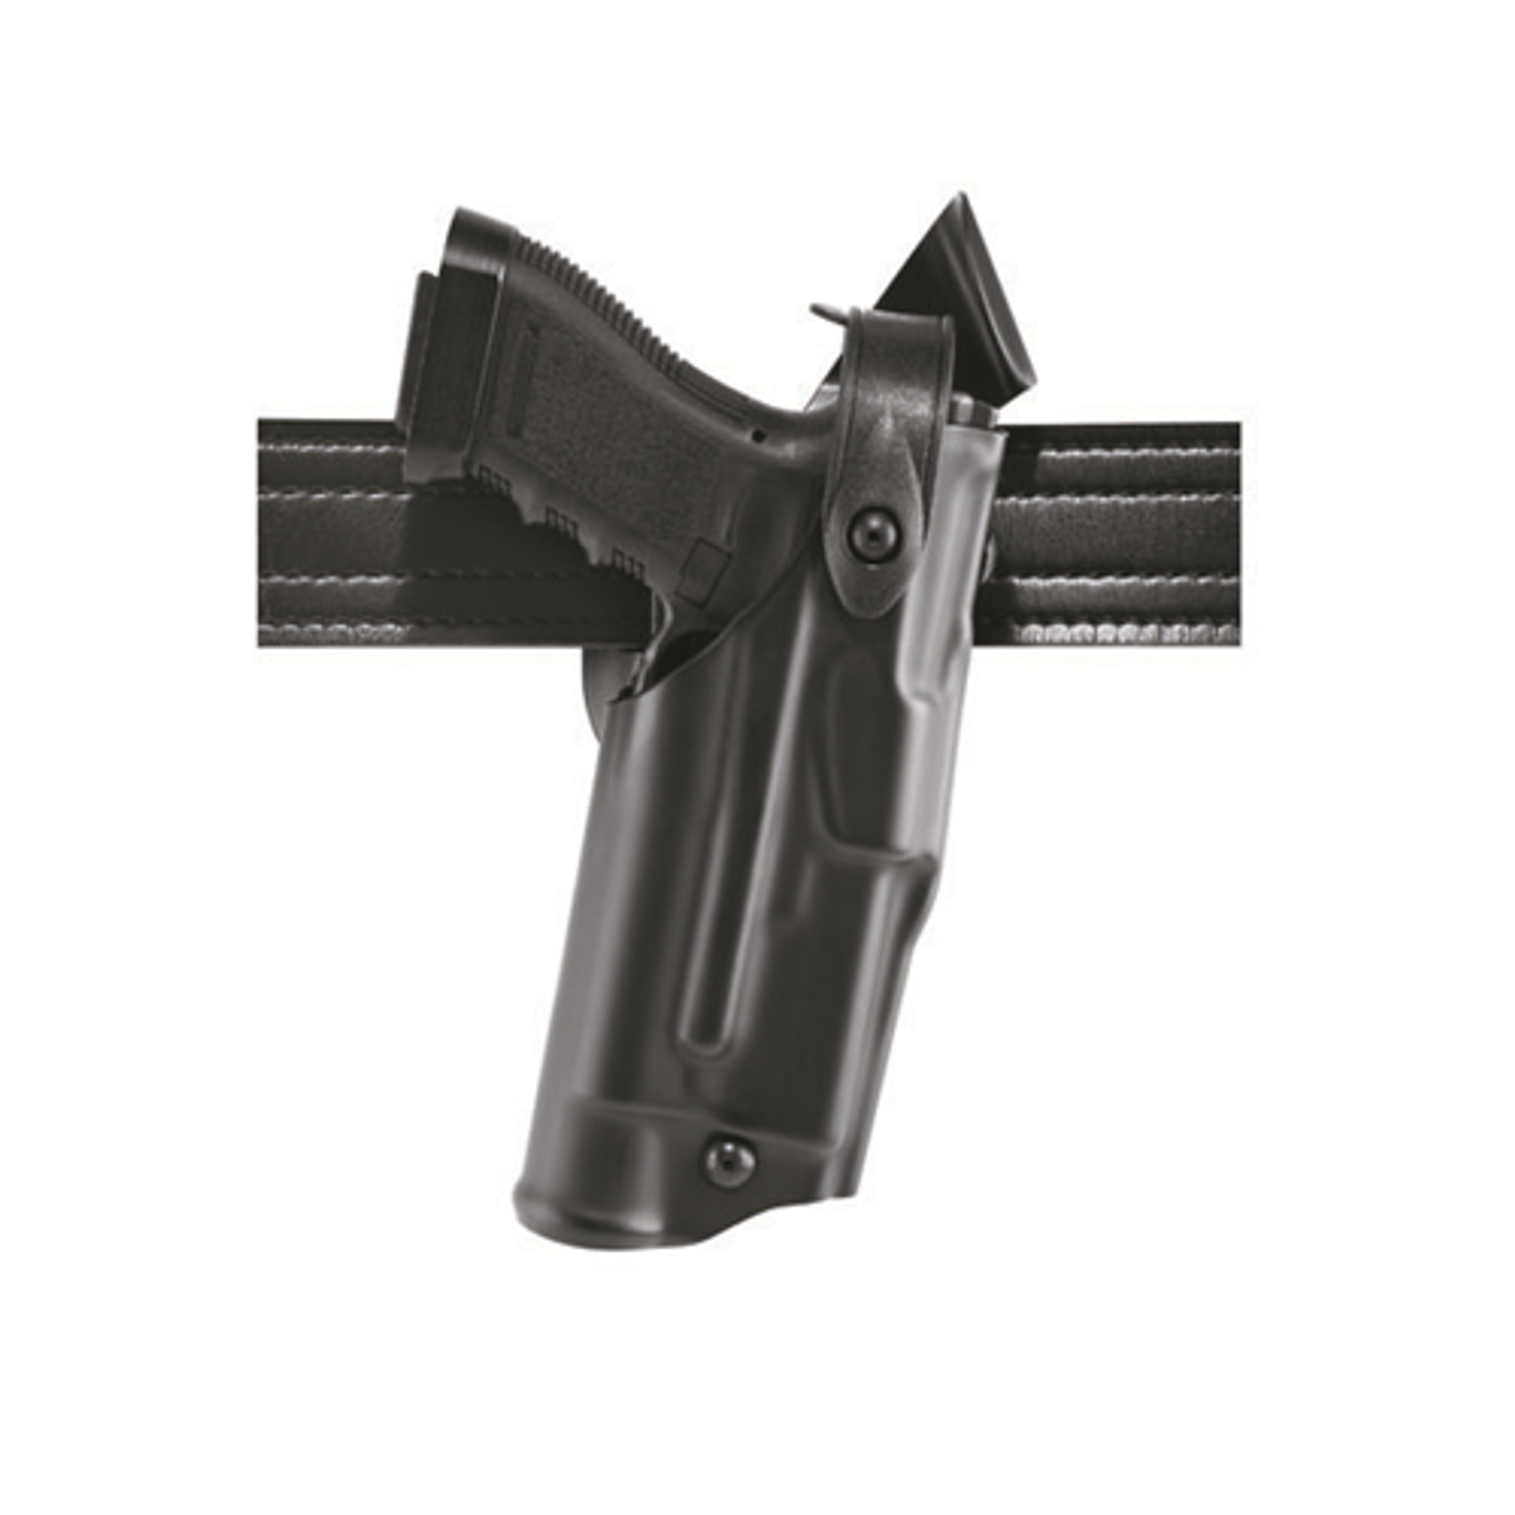 Model 6360 Als/sls Mid-ride, Level Iii Retention Duty Holster For Smith & Wesson M&p 2.0 9 W/ Light - KR6360-2222-411